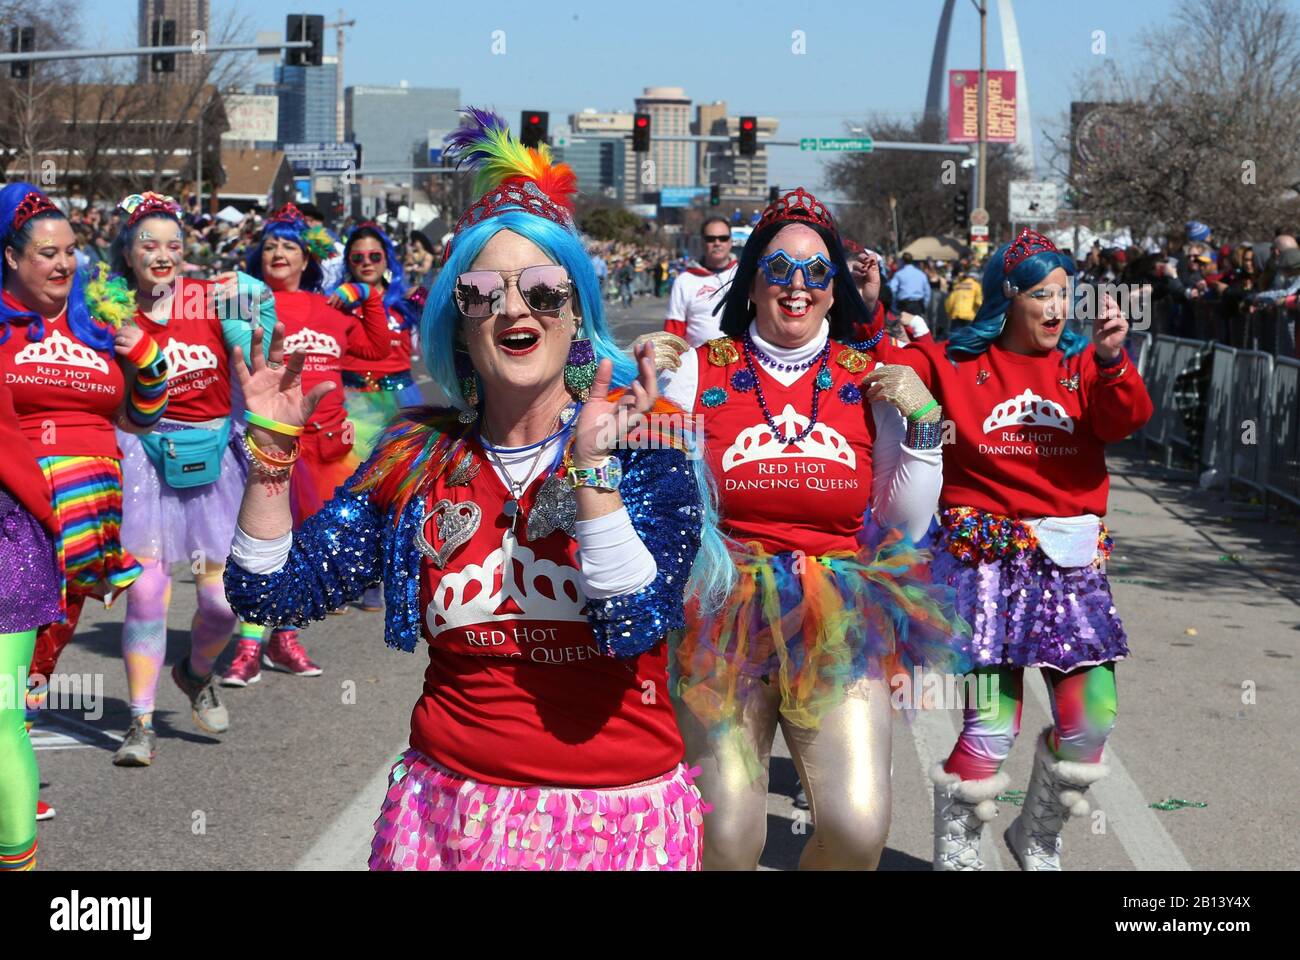 St. Louis, United States. 22nd Feb, 2020. A dance group from Cincinnati, performs during the St. Louis Mardi Gras Parade in St. Louis on Saturday, February 22, 2020. Photo by Bill Greenblatt/UPI Credit: UPI/Alamy Live News Stock Photo